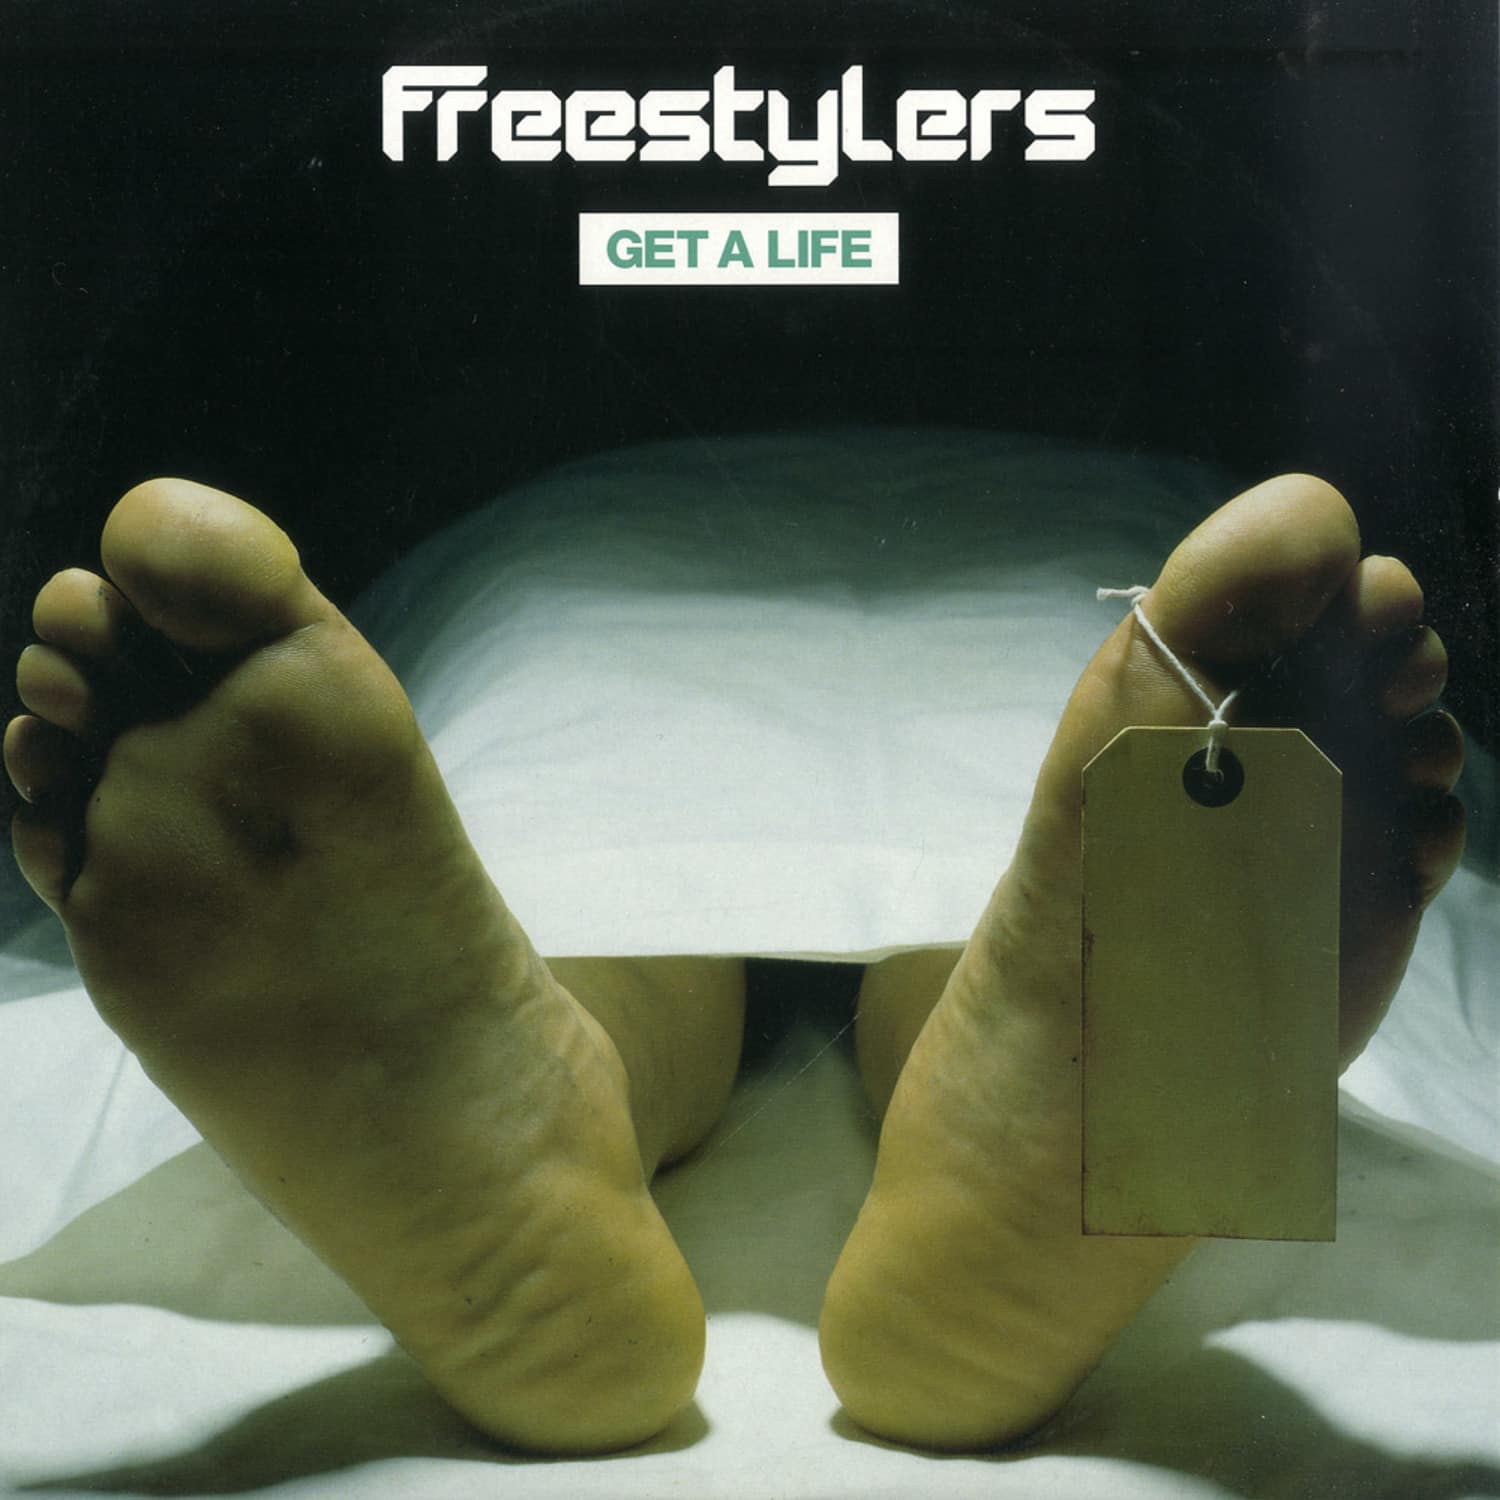 Freestylers - GET A LIFE 